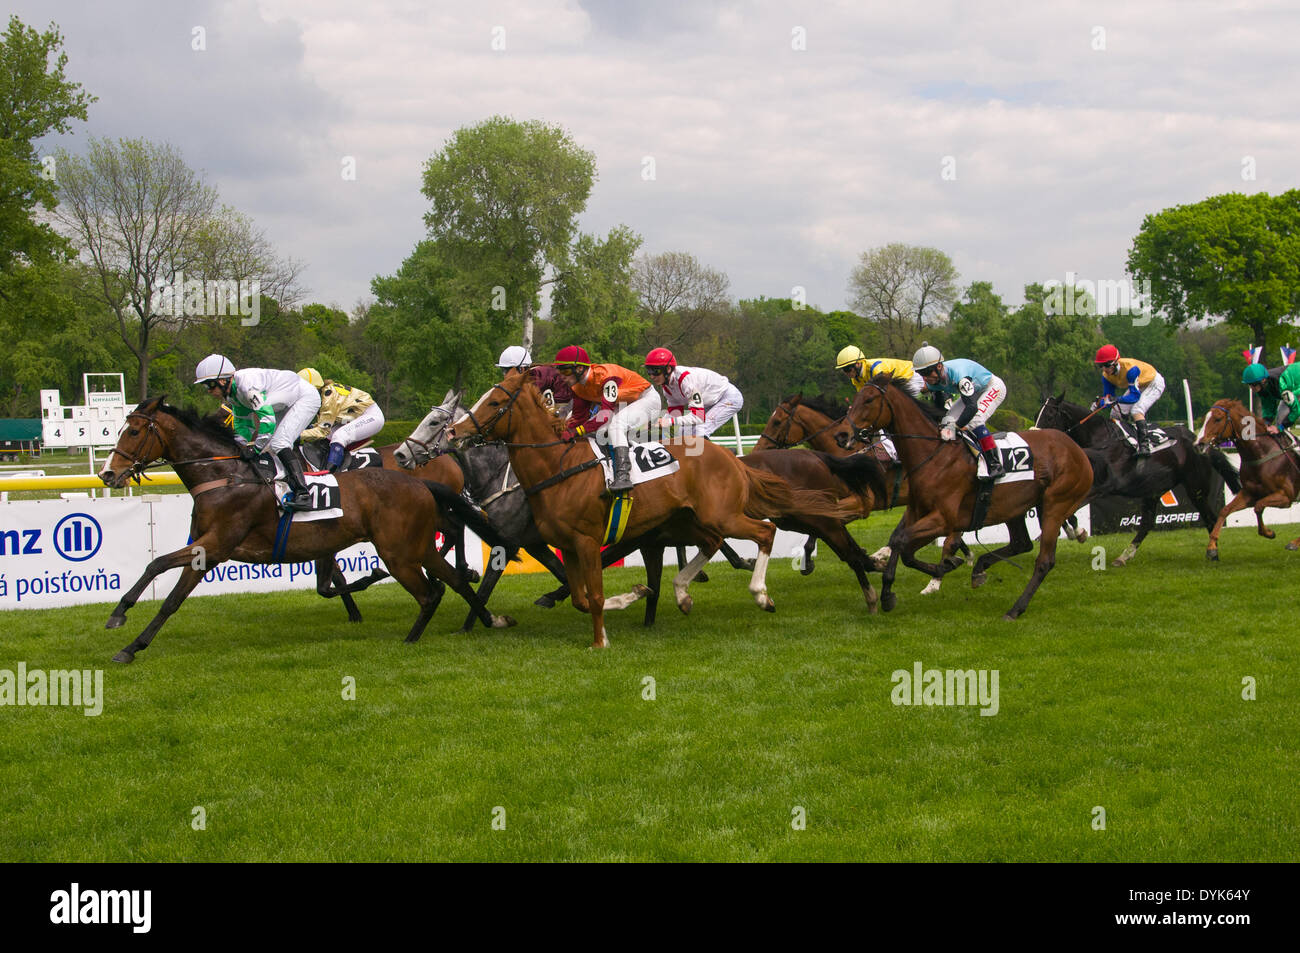 BRATISLAVA, SLOVAKIA, 20th April 2014. A group of jockeys and horses leaded by Twist Dancer (left, number 11, CZE, jockey Martin Srnec) competes during the race for the Rosenstrum Prix. The main race for the April Grand Prix that was held at the racecource of Bratislava, the capital of the Slovak Republic, was preceded by race for Otto Suchovsky Memorial and several other races. Credit:  Dmitry Argunov/Alamy Live News Stock Photo